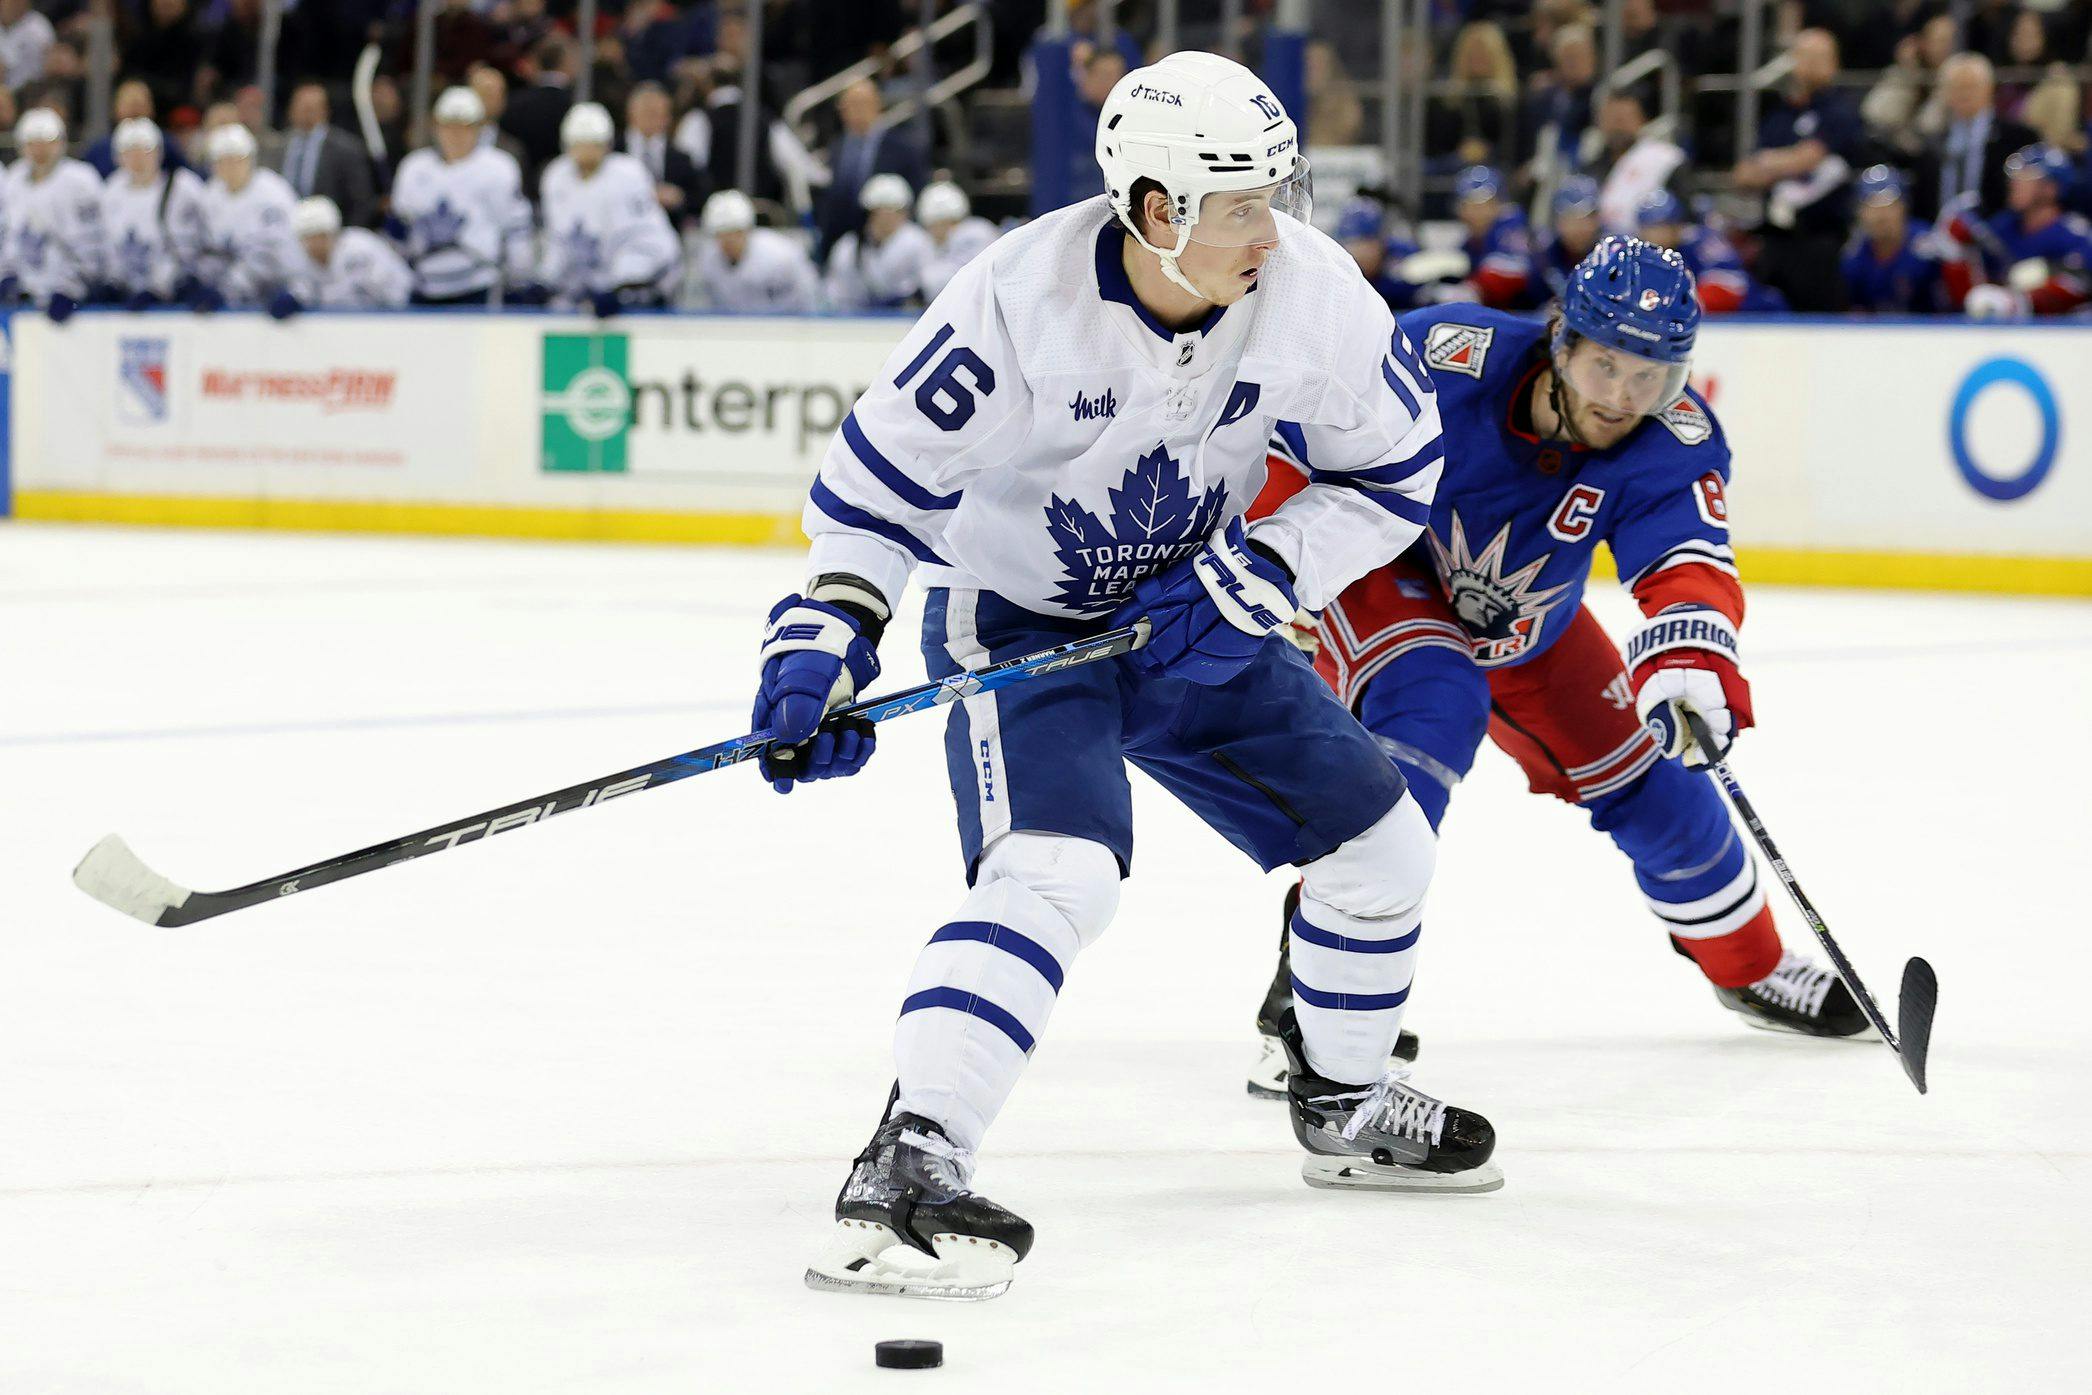 Toronto Maple Leafs’ Mitch Marner’s point streak ends at 23 games